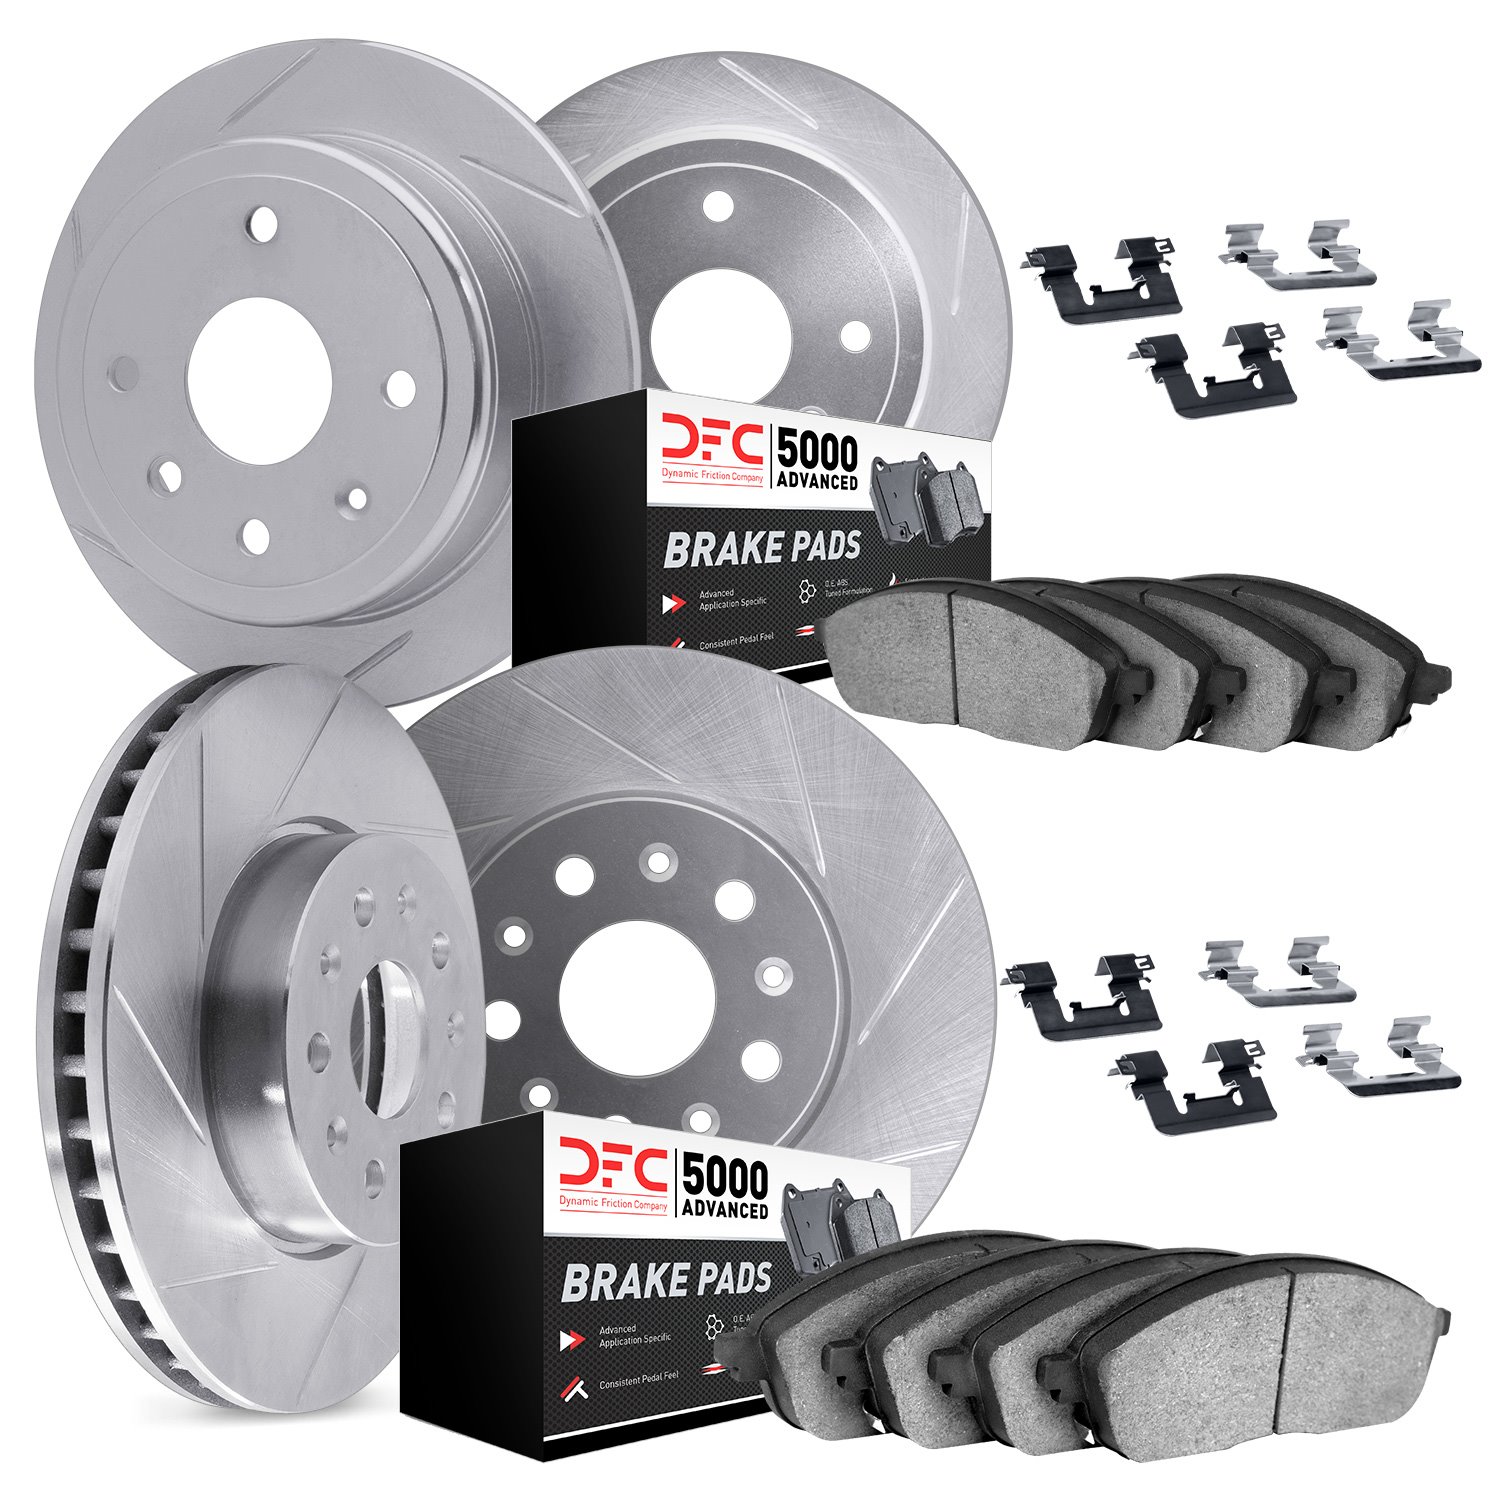 5514-58013 Slotted Brake Rotors w/5000 Advanced Brake Pads Kit & Hardware [Silver], 2019-2019 Acura/Honda, Position: Front and R